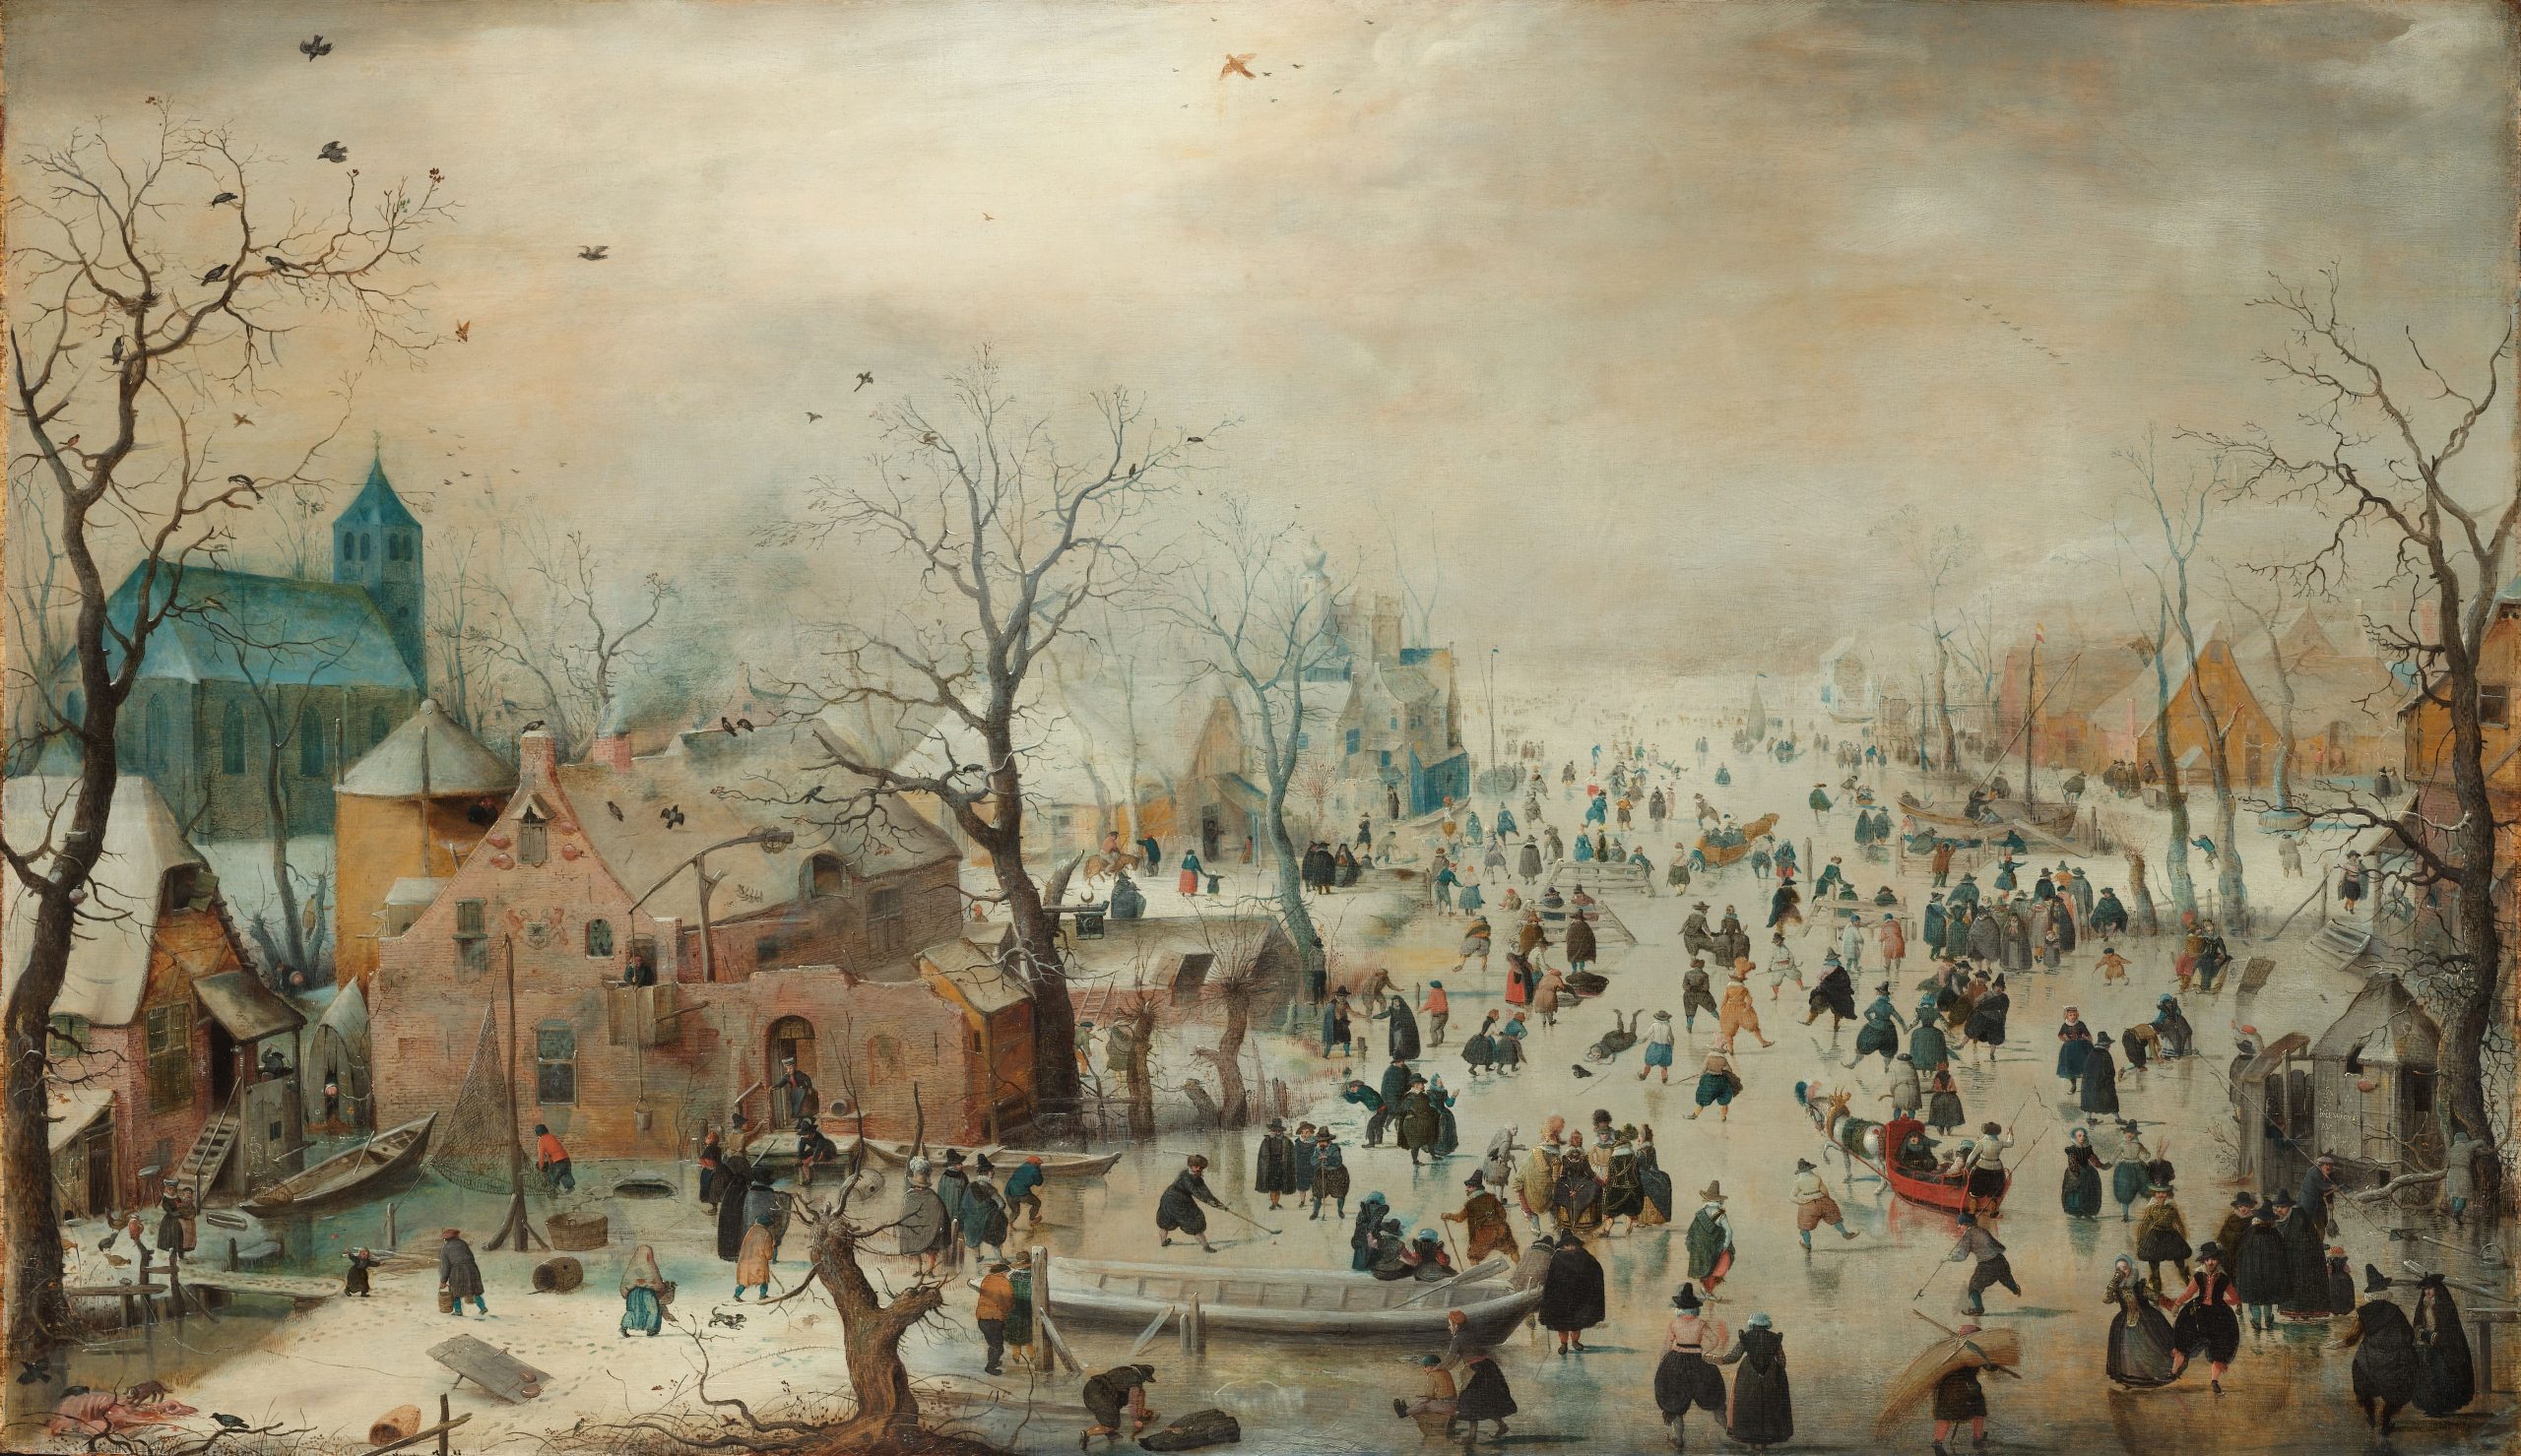 A winter landscape with people ice skating in a town